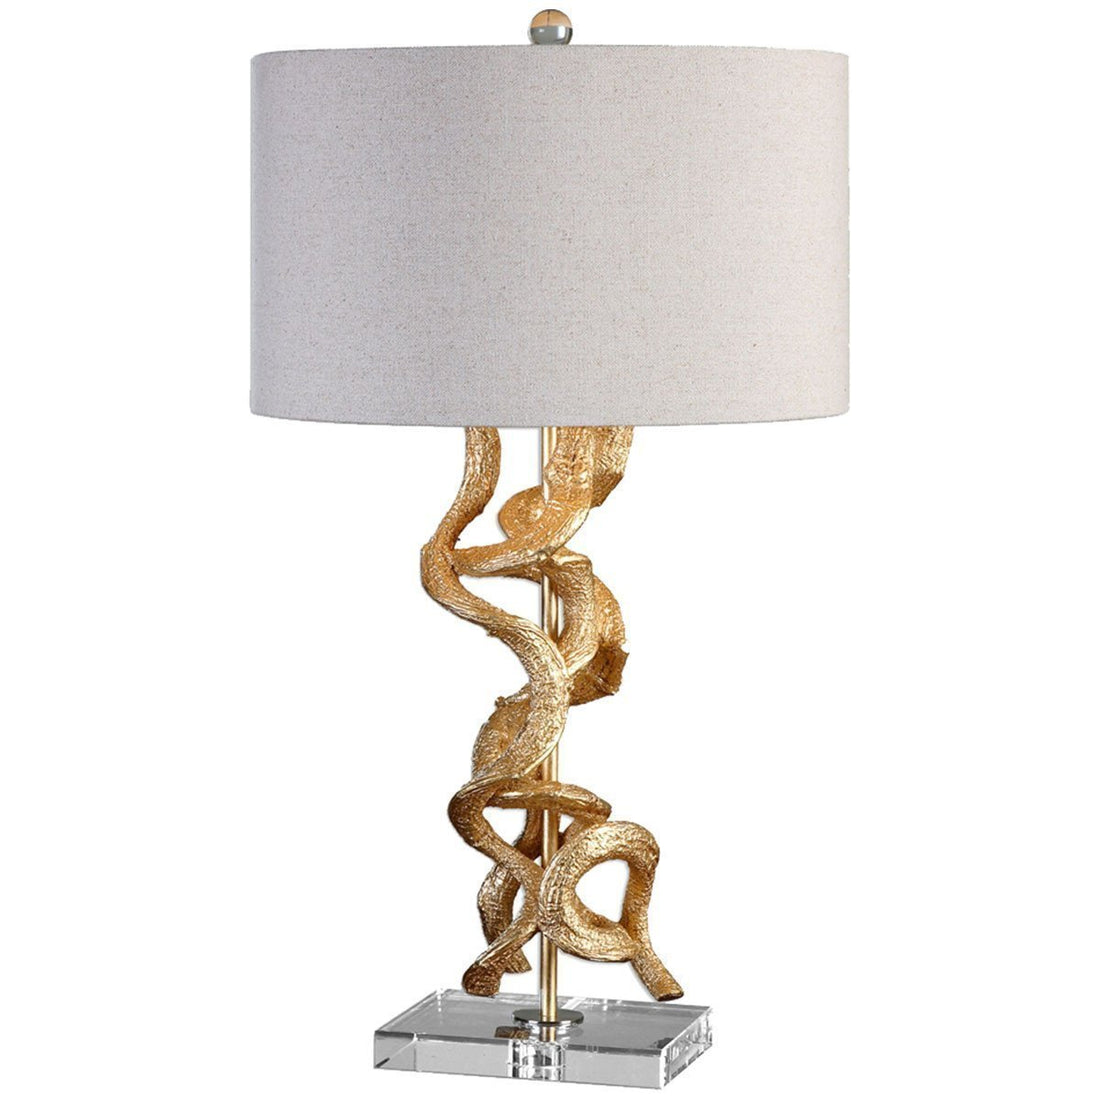 Uttermost Twisted Vines Gold Table Lamp